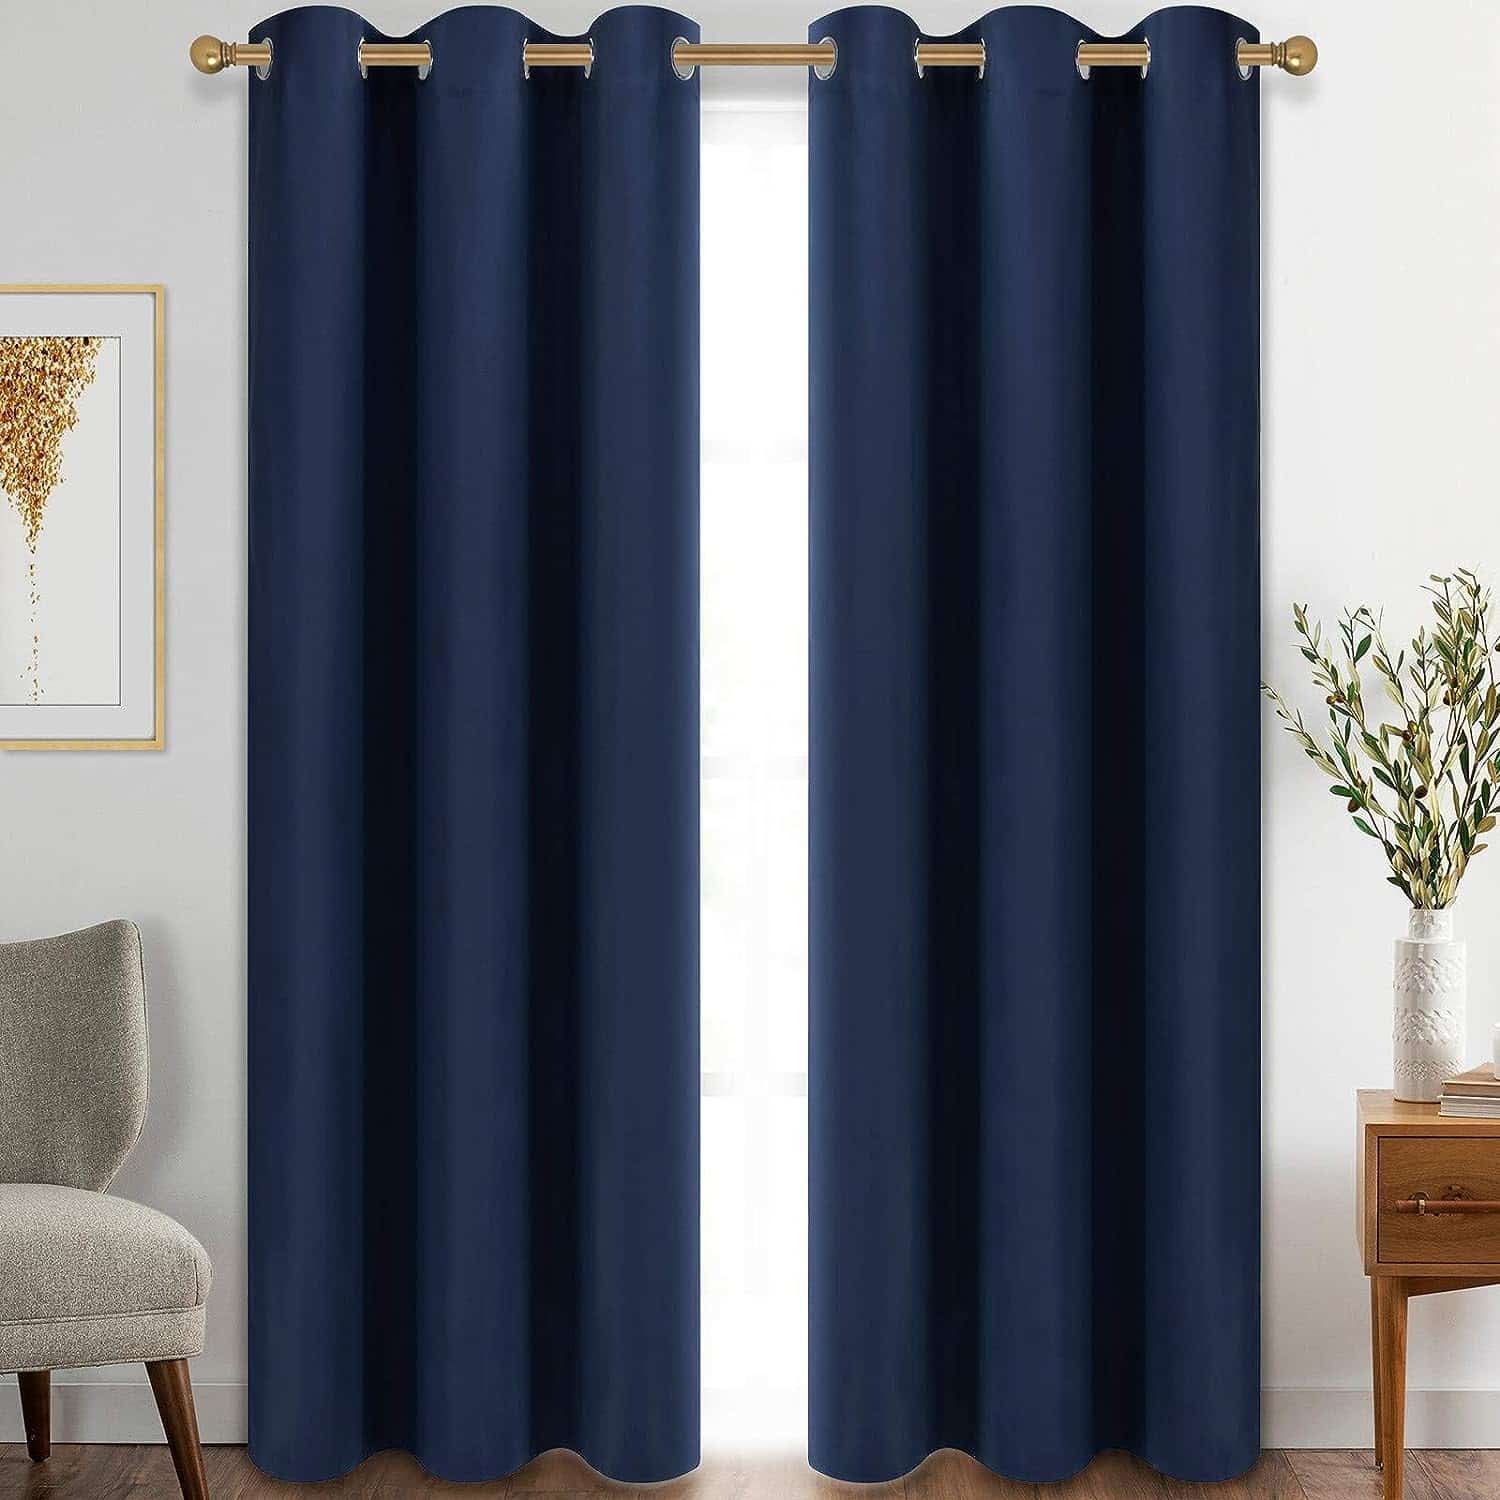 navy blue blackout curtains living room